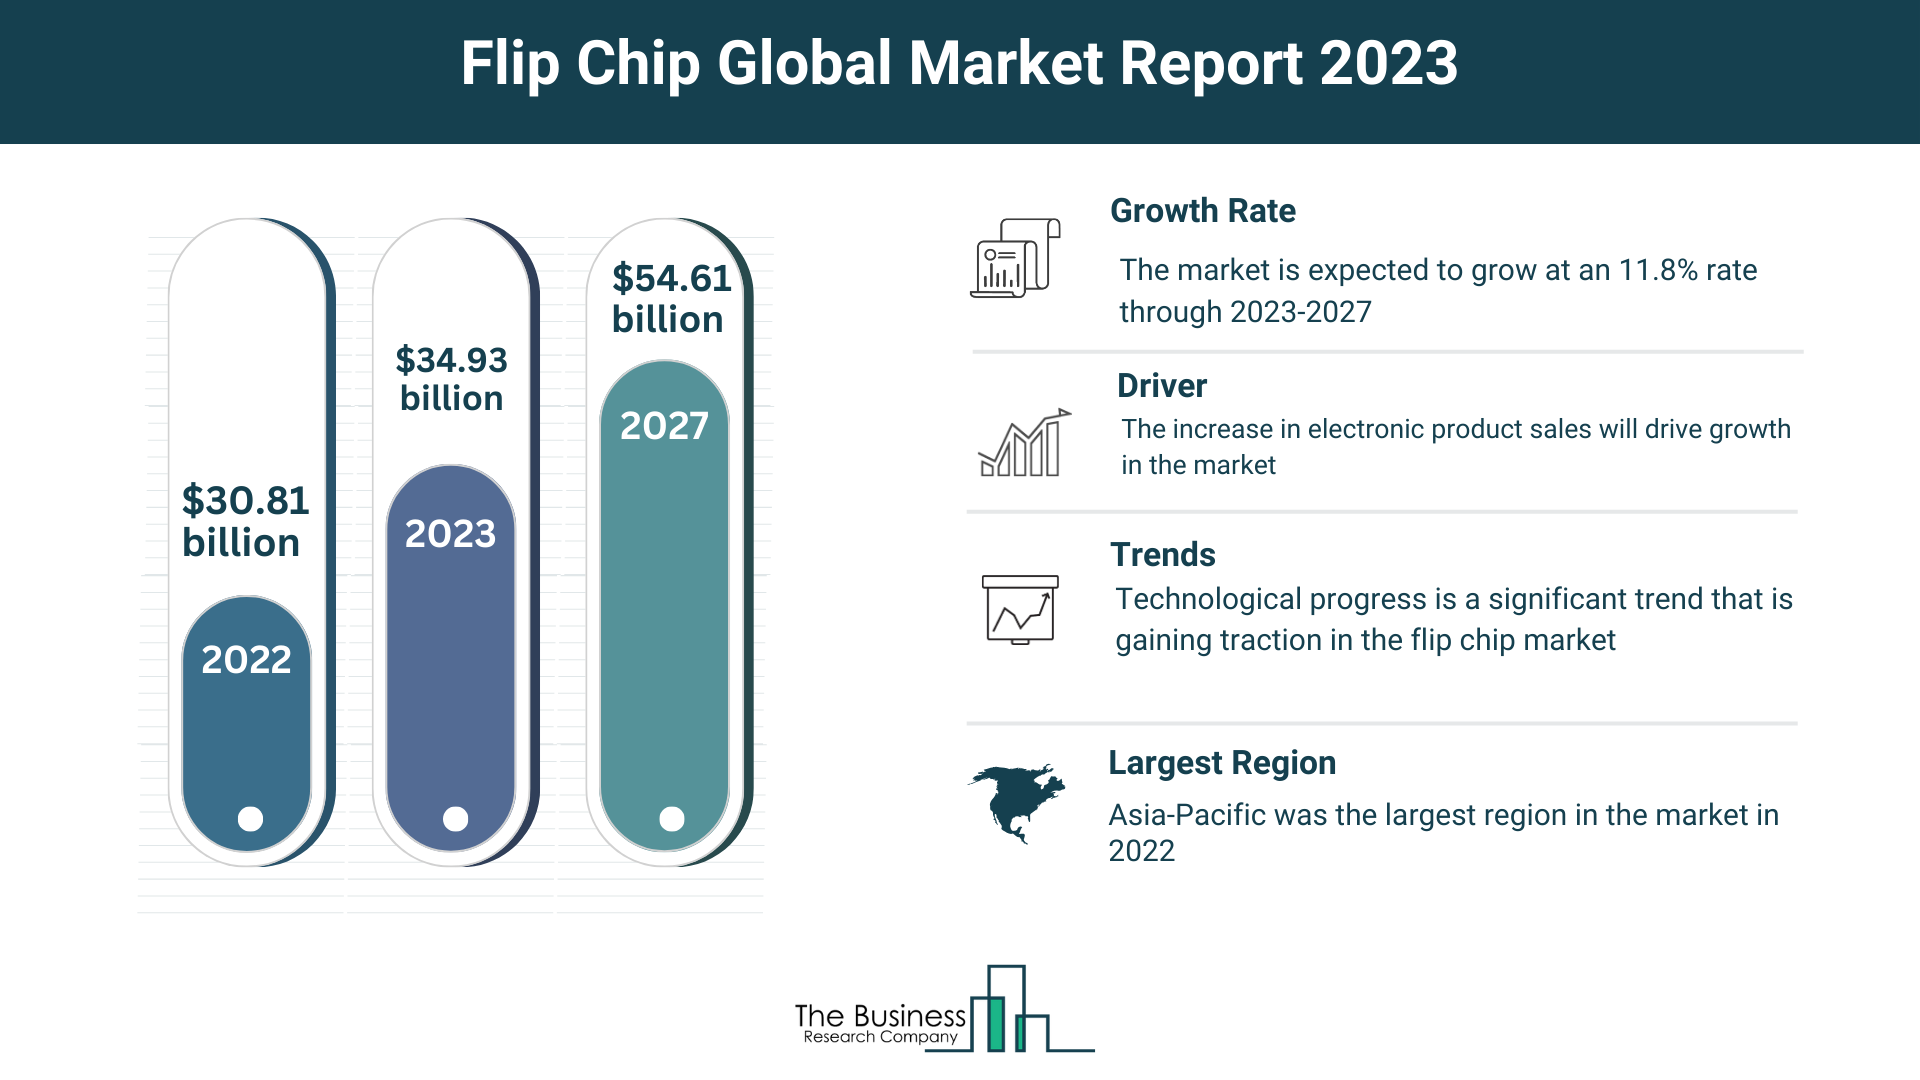 Global Flip Chip Market Analysis: Size, Drivers, Trends, Opportunities And Strategies